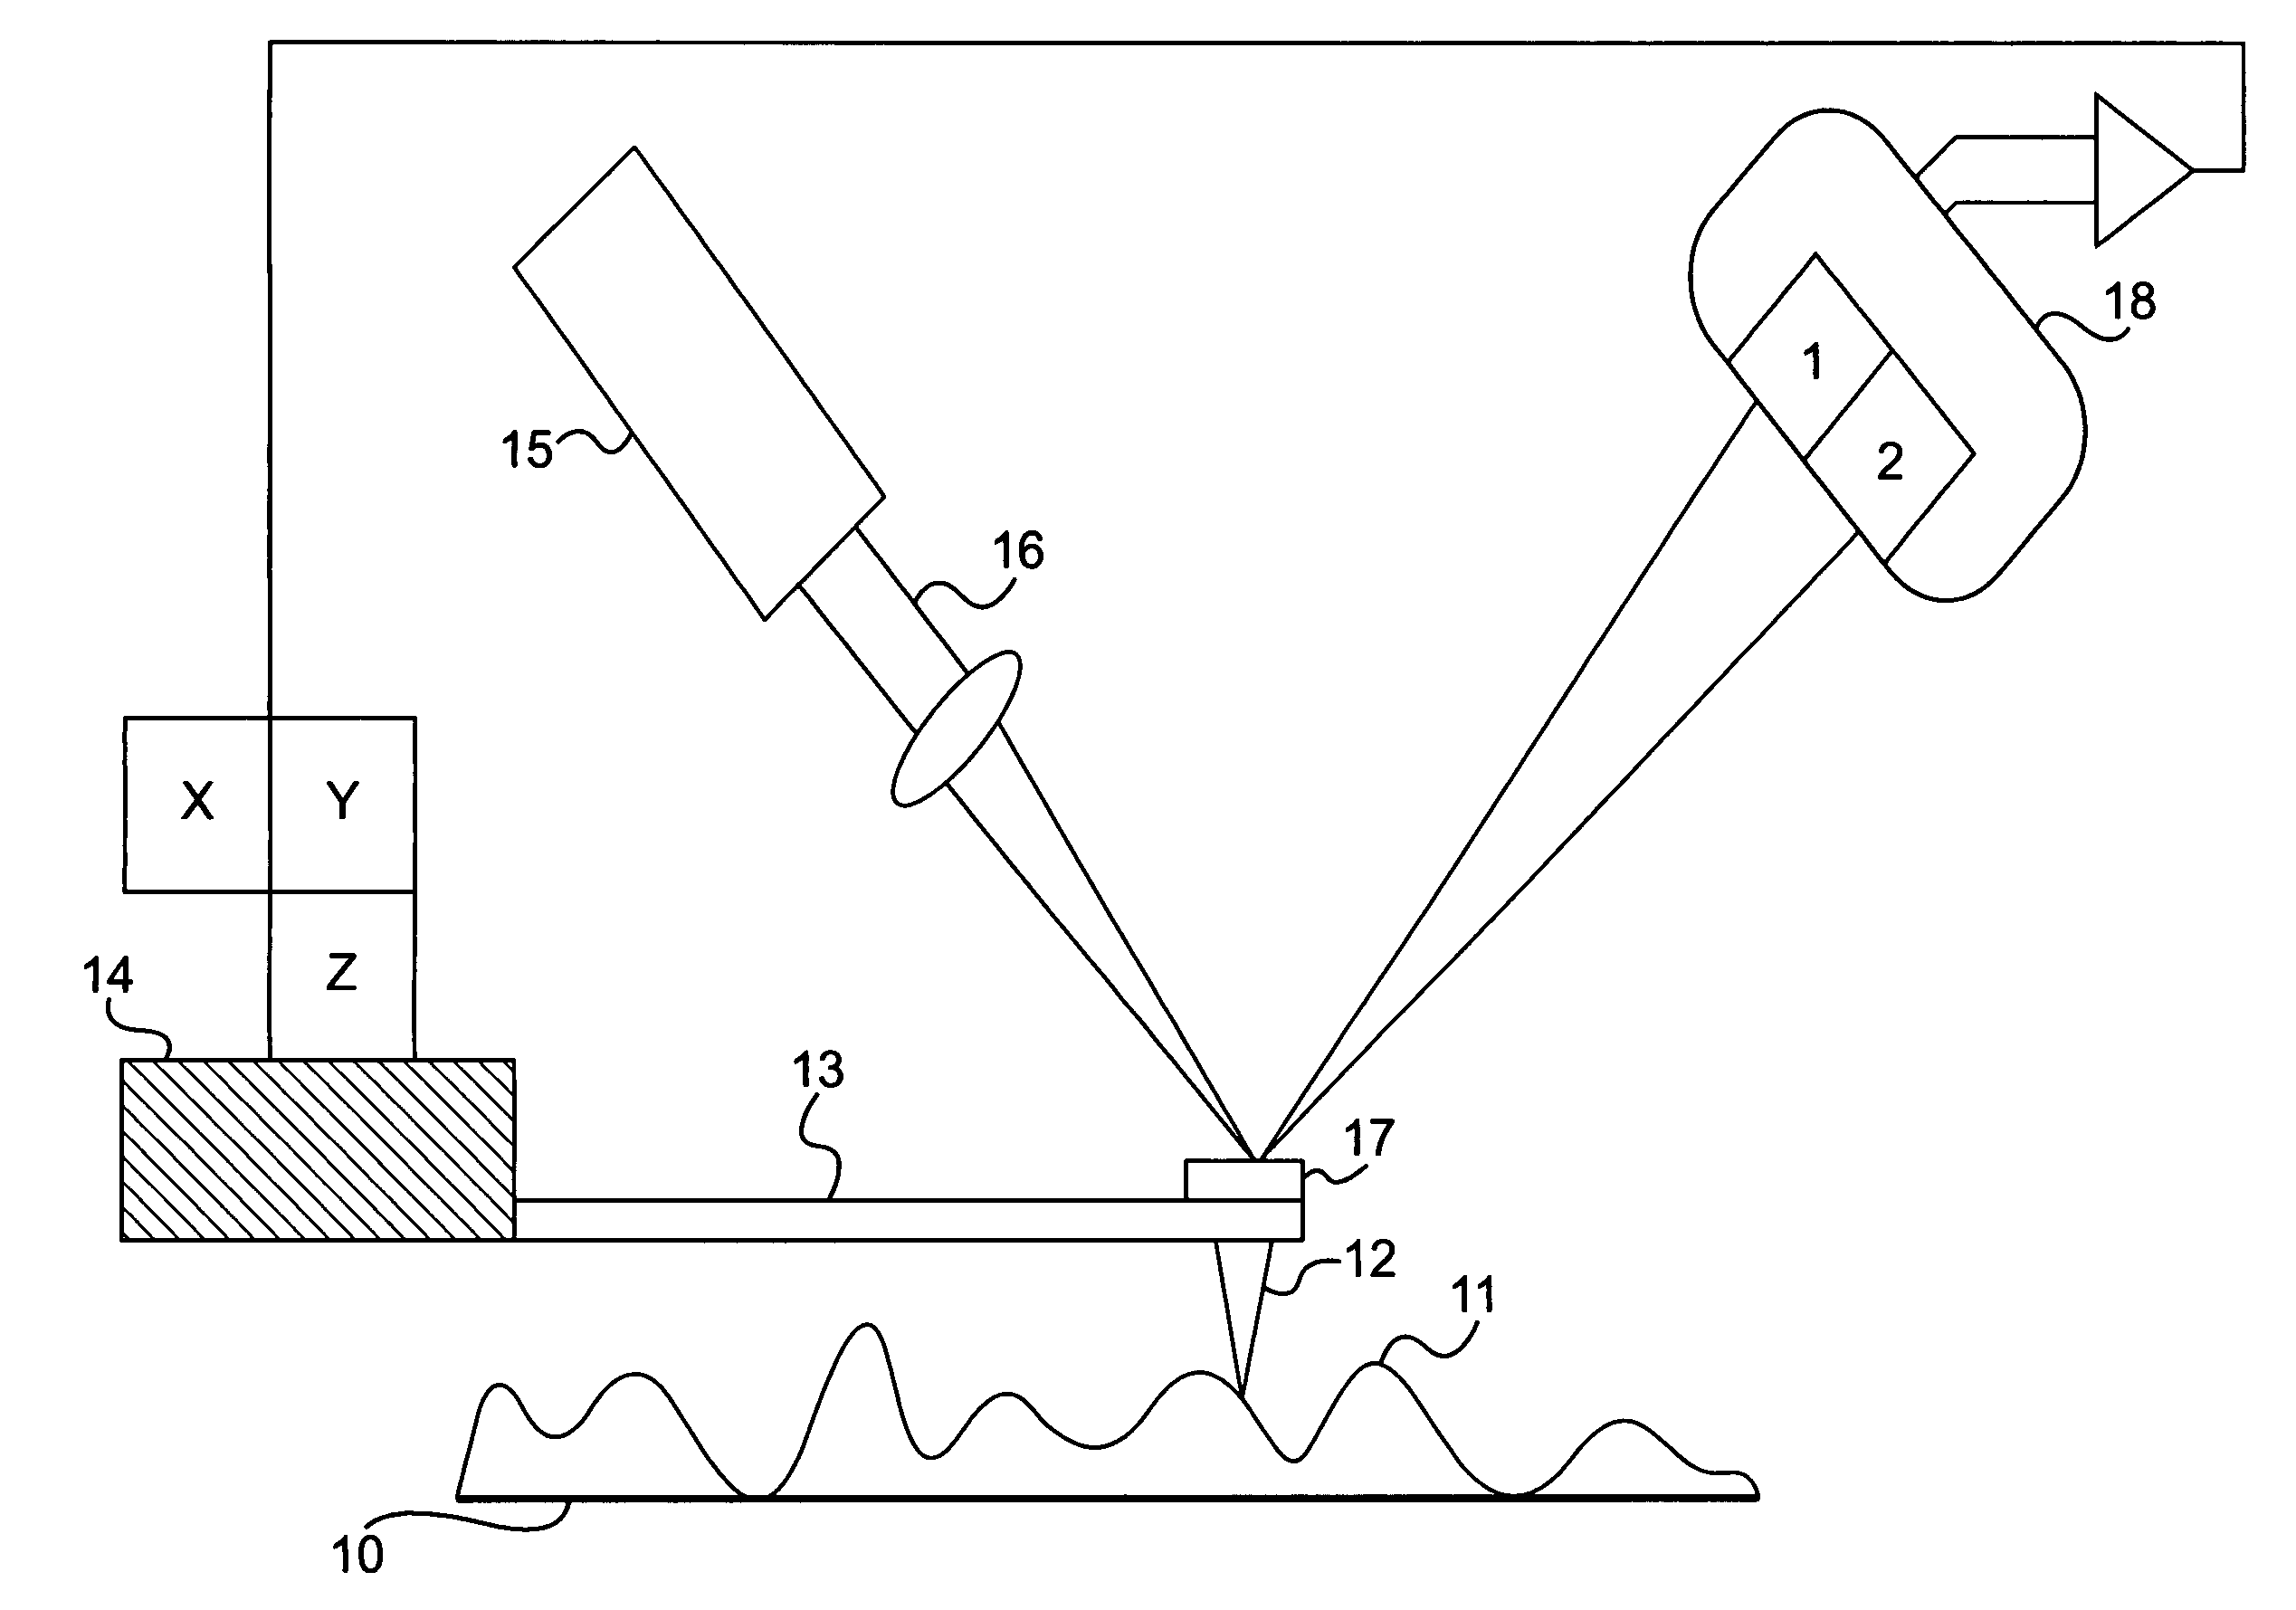 System and method for deconvoluting the effect of topography on scanning probe microscopy measurements